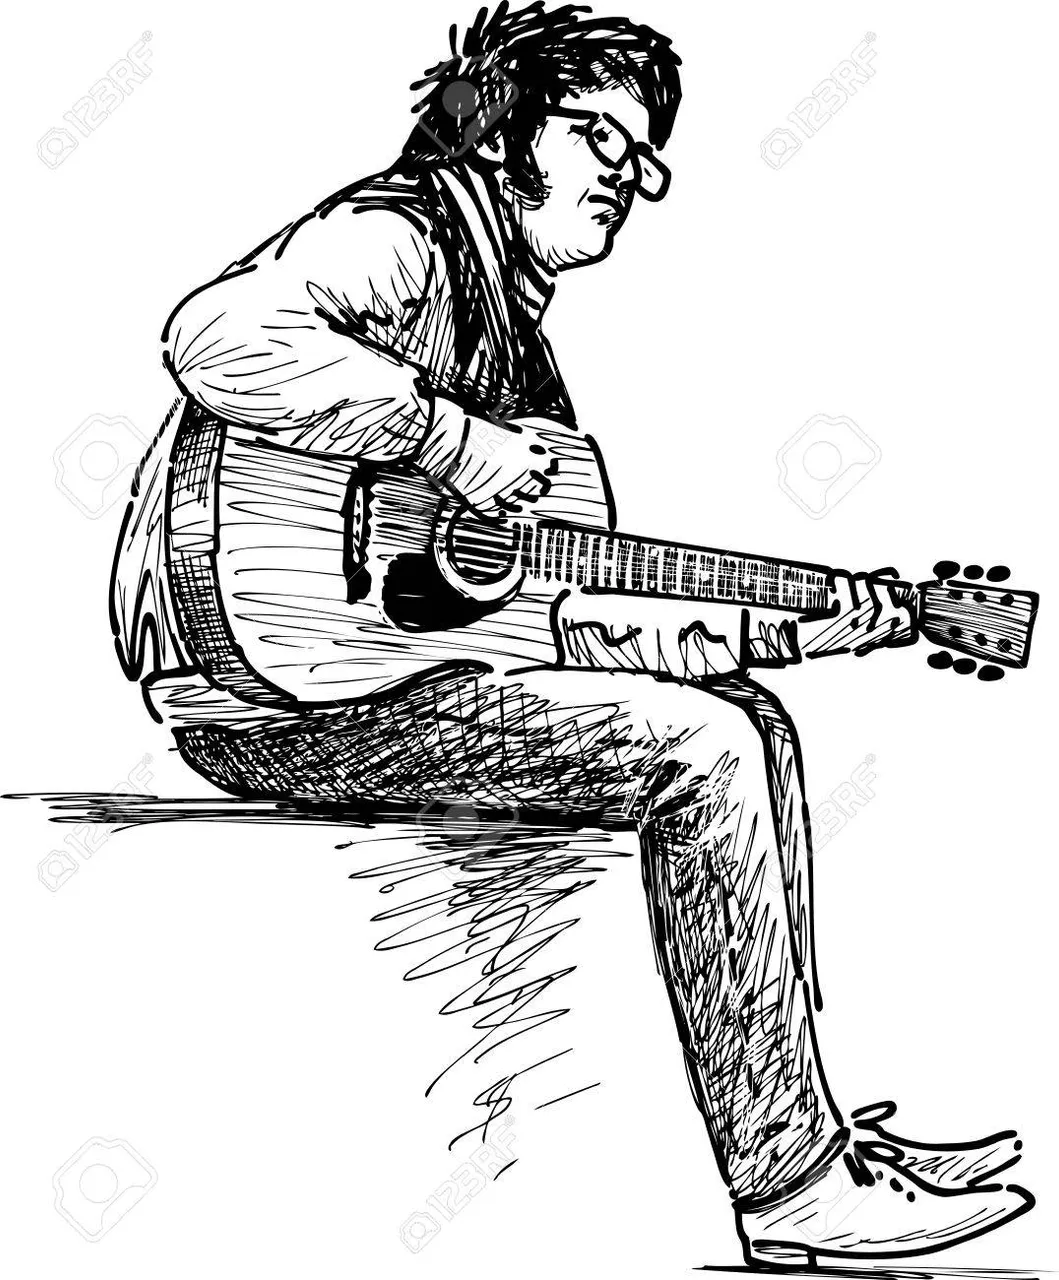 80464247_vector_drawing_of_an_young_guitarist_.jpg